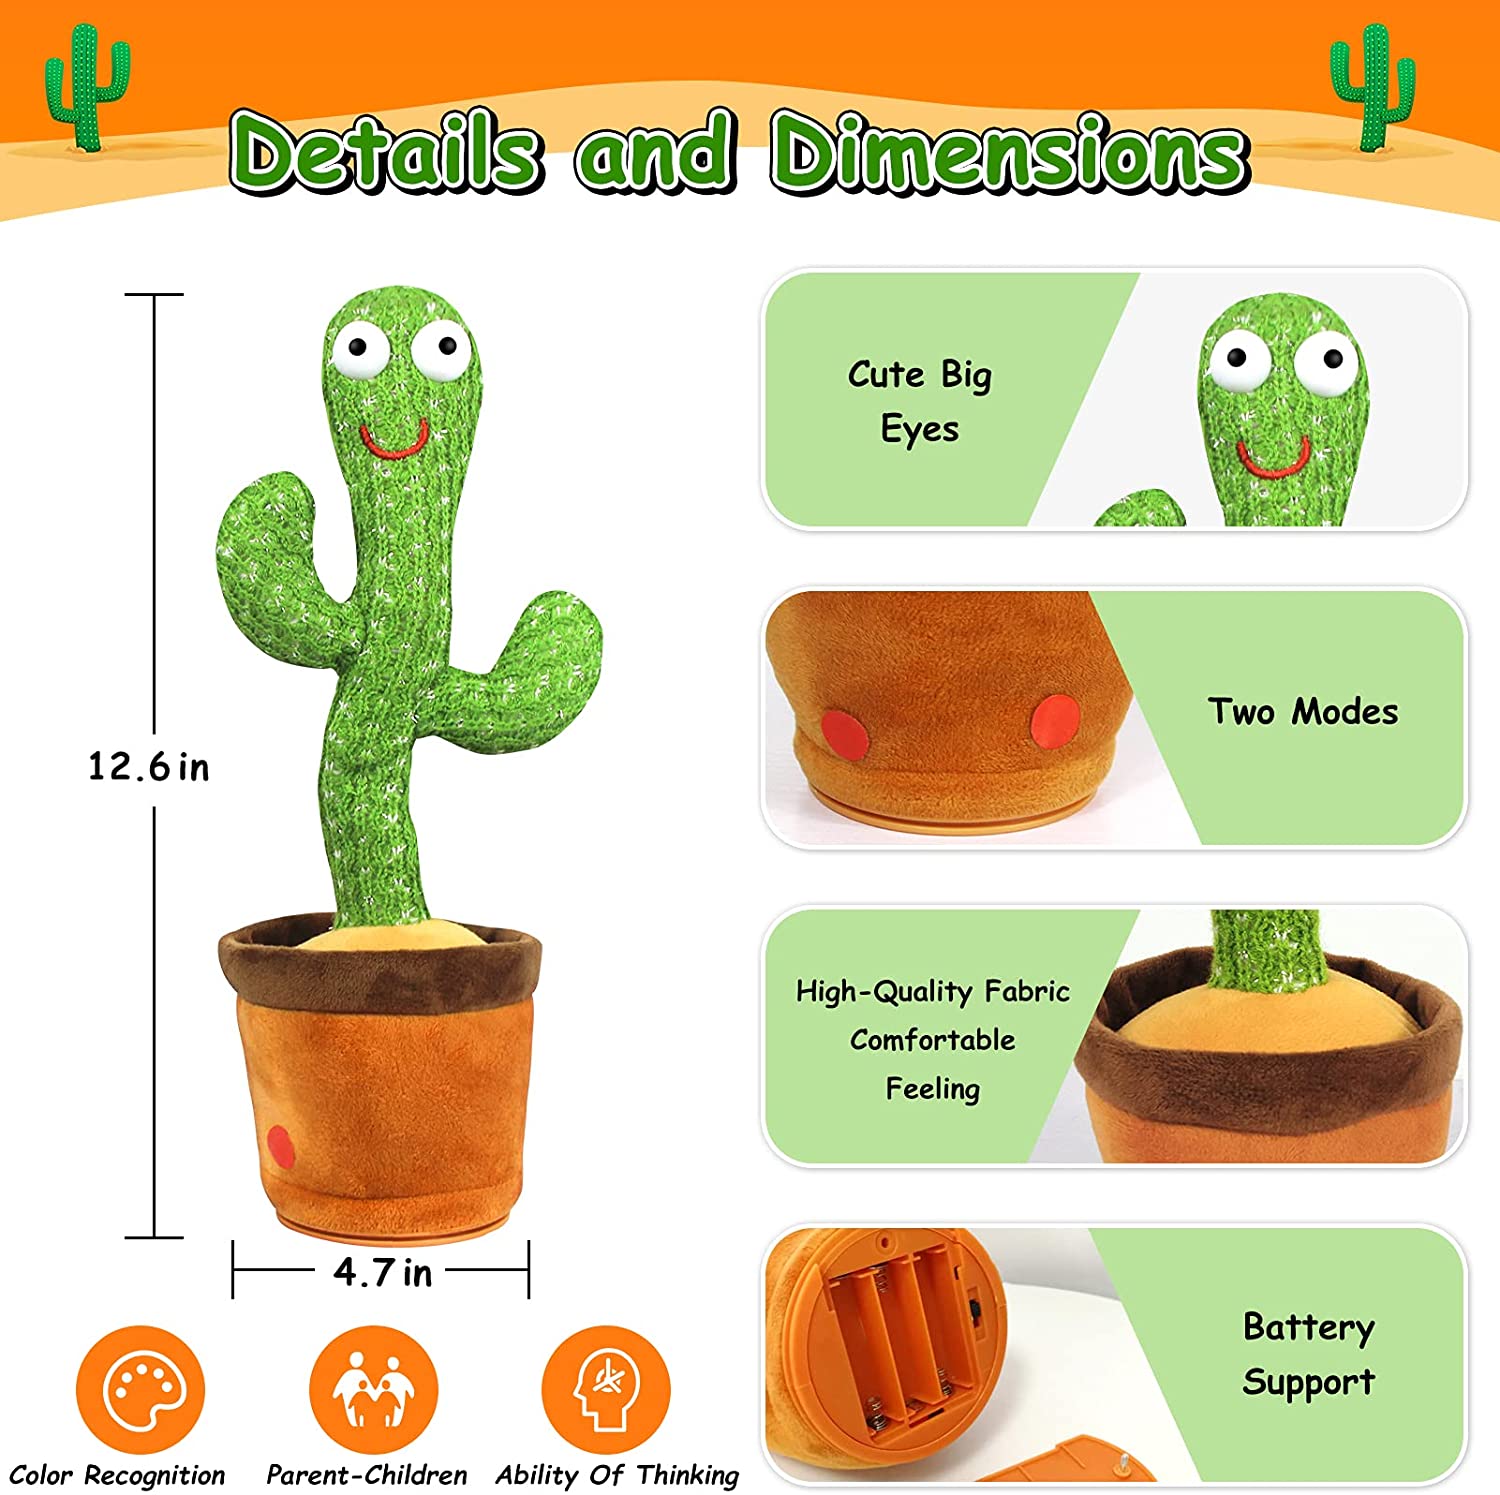 Dancing Cactus: I Can Repeat Voice, Dance & Sing freeshipping - FirstSightStore